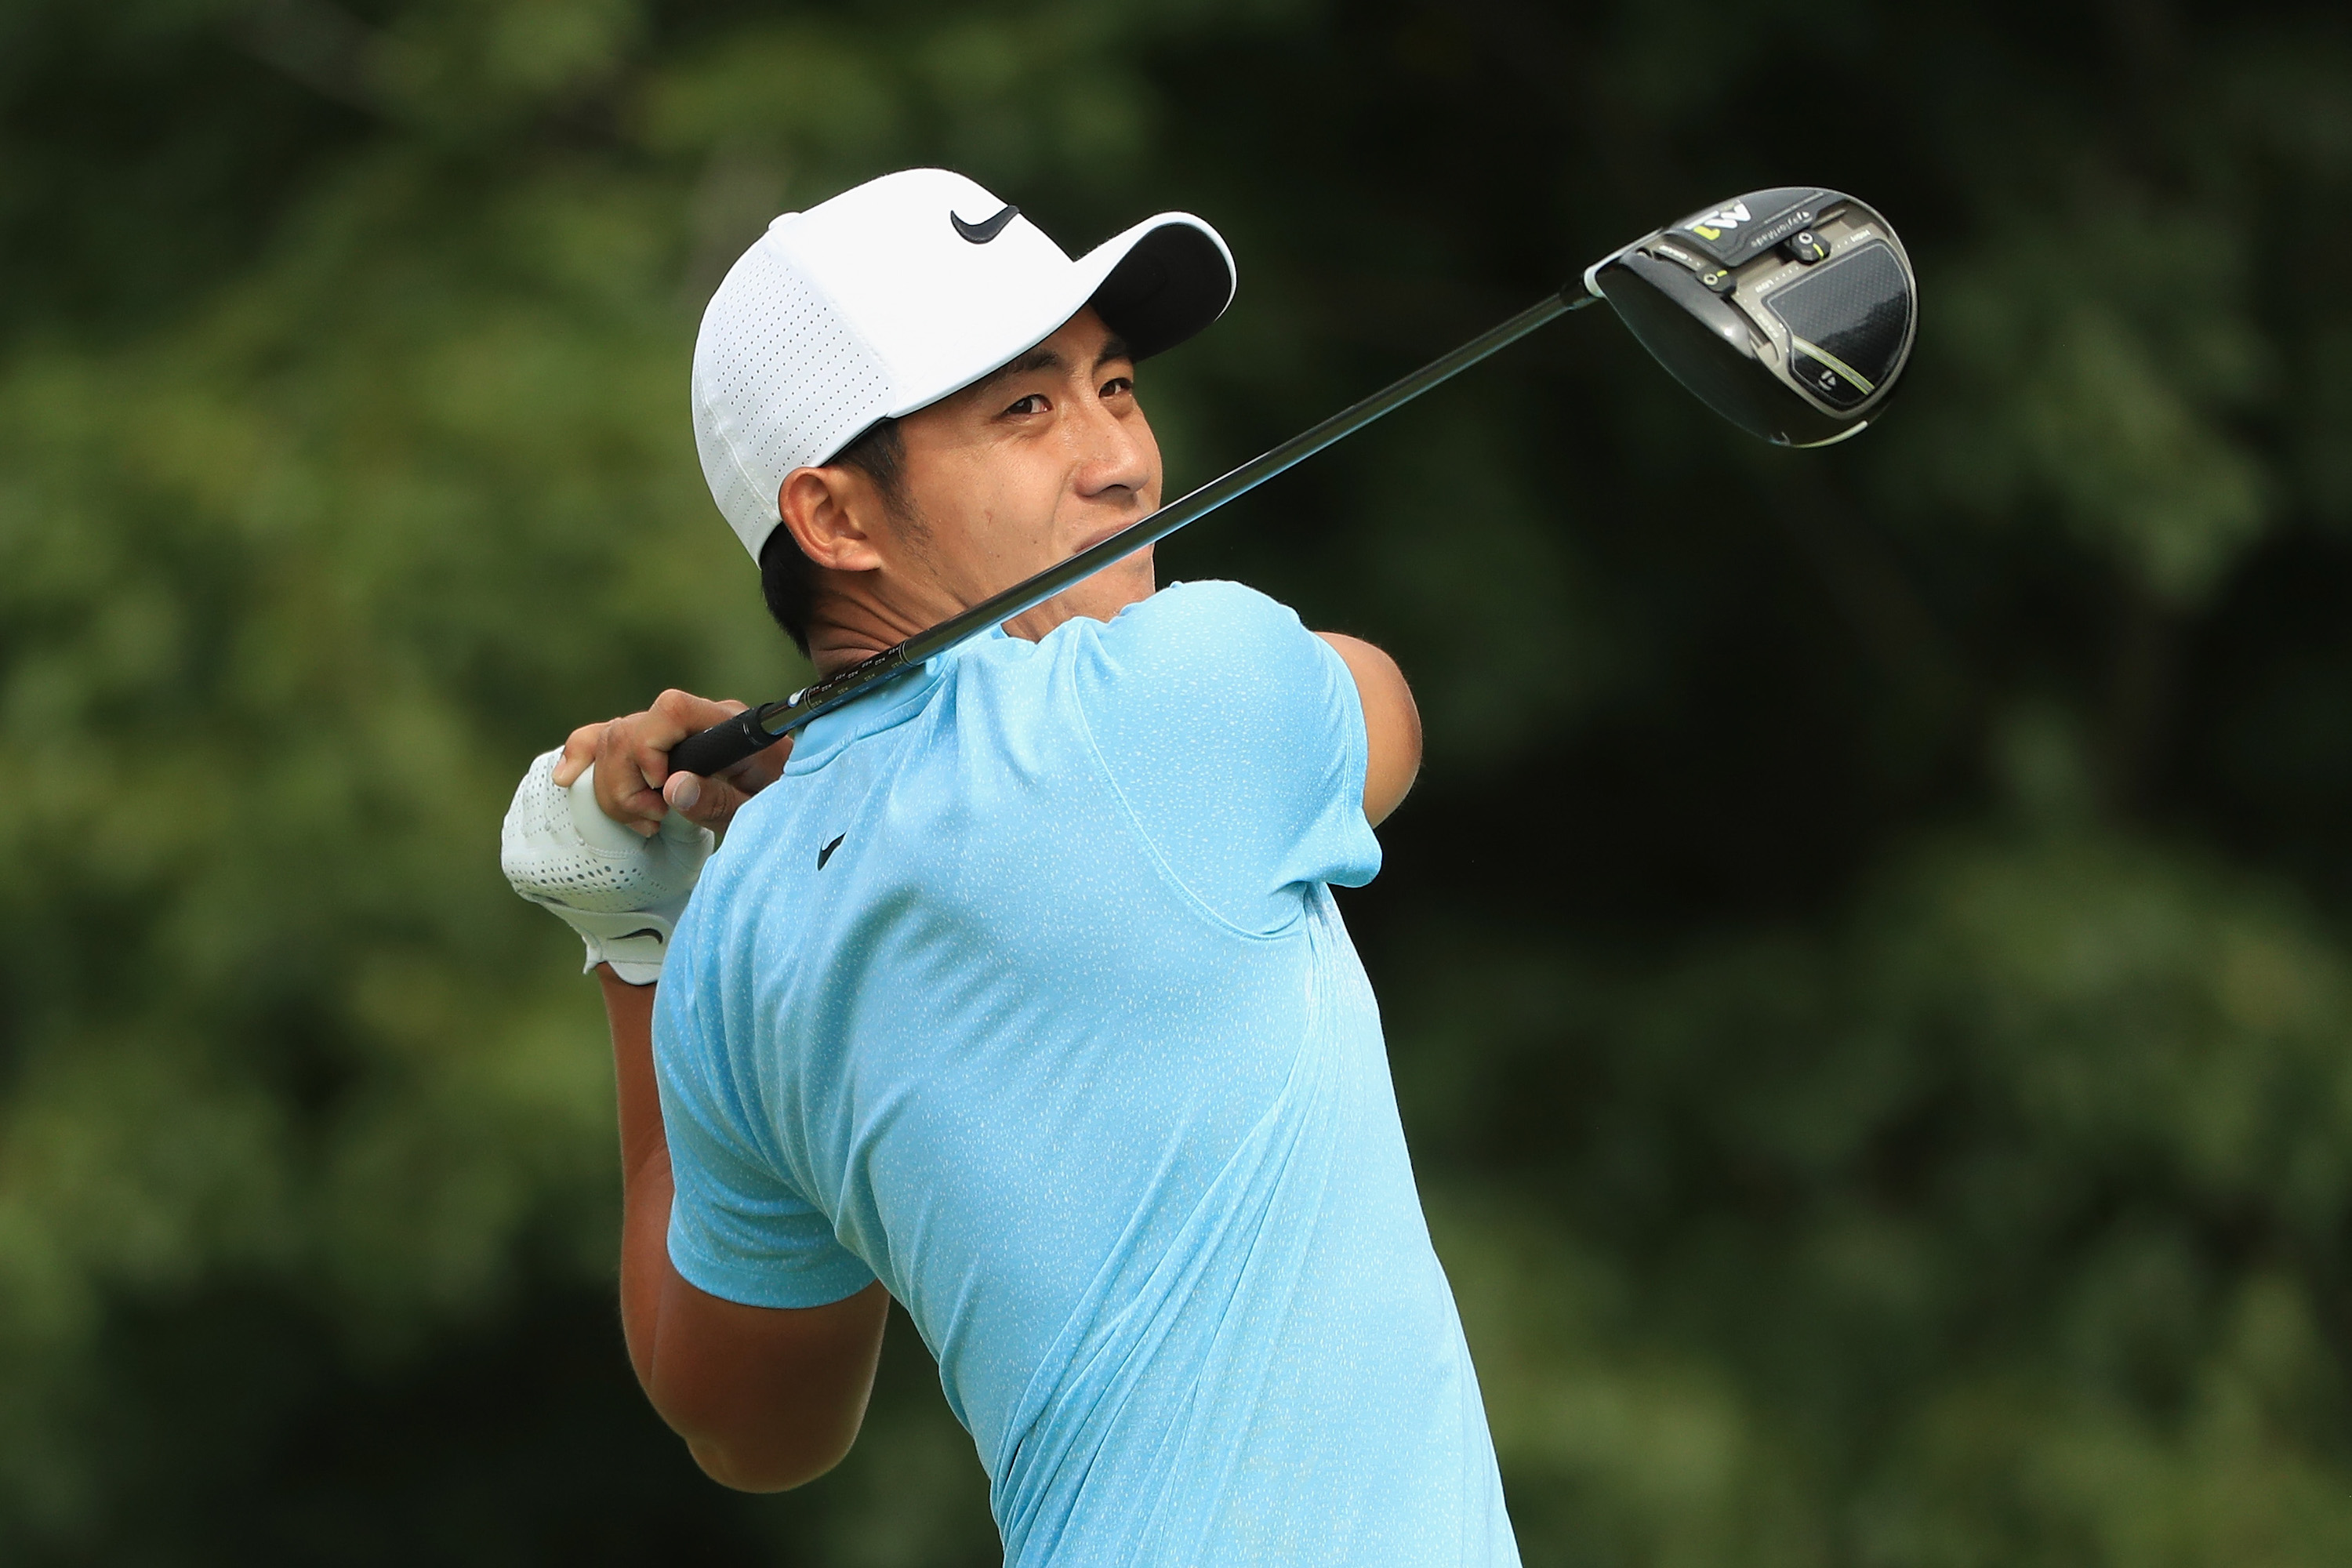 CHINESE TAIPEI’S PAN SETS SIGHT ON A STRONG YEAR ON PGA TOUR